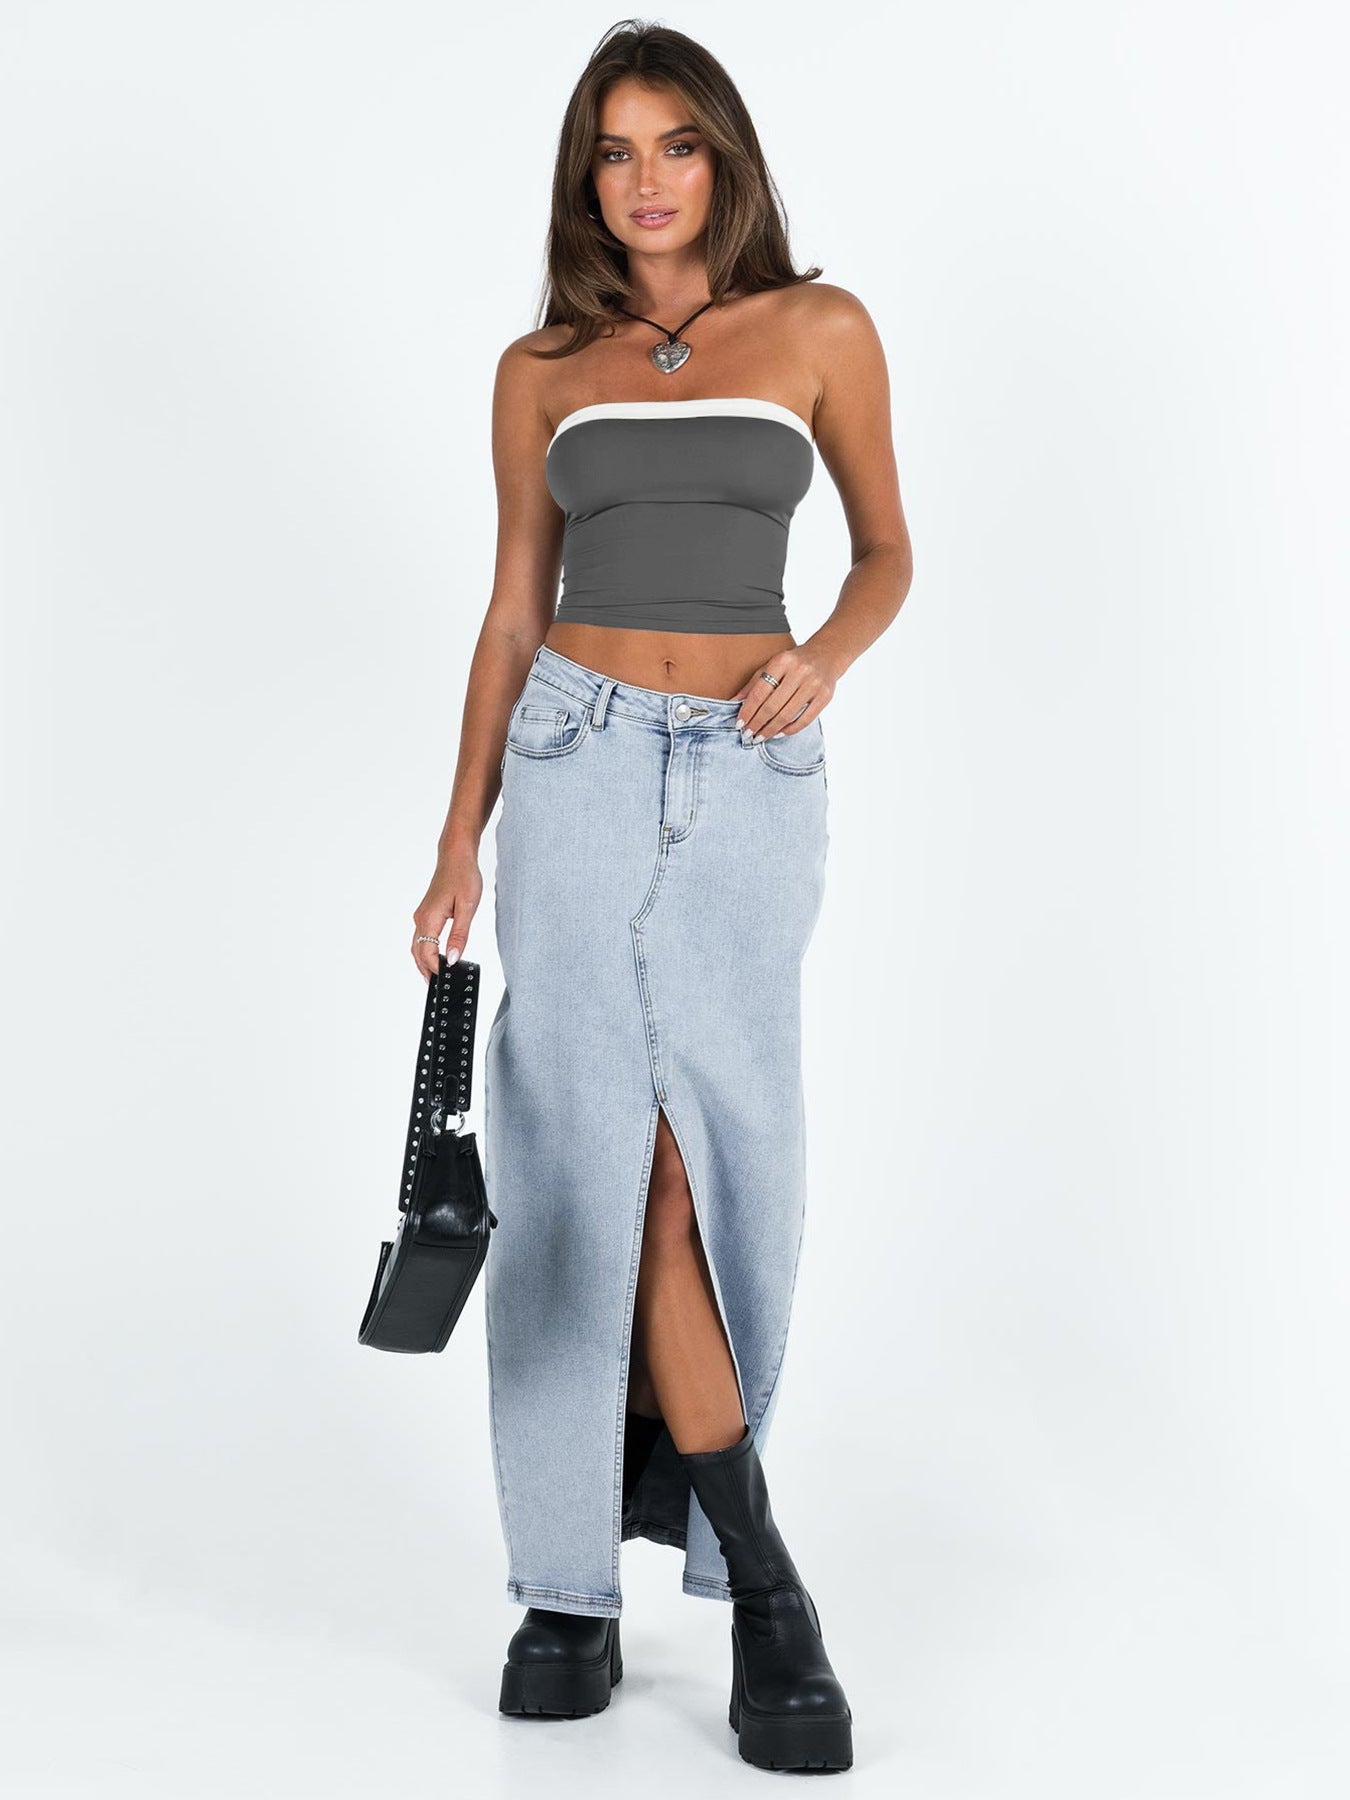 Crop Tops- Contrast Women's Strapless Tube Crop Top with Trim Accents- - Chuzko Women Clothing